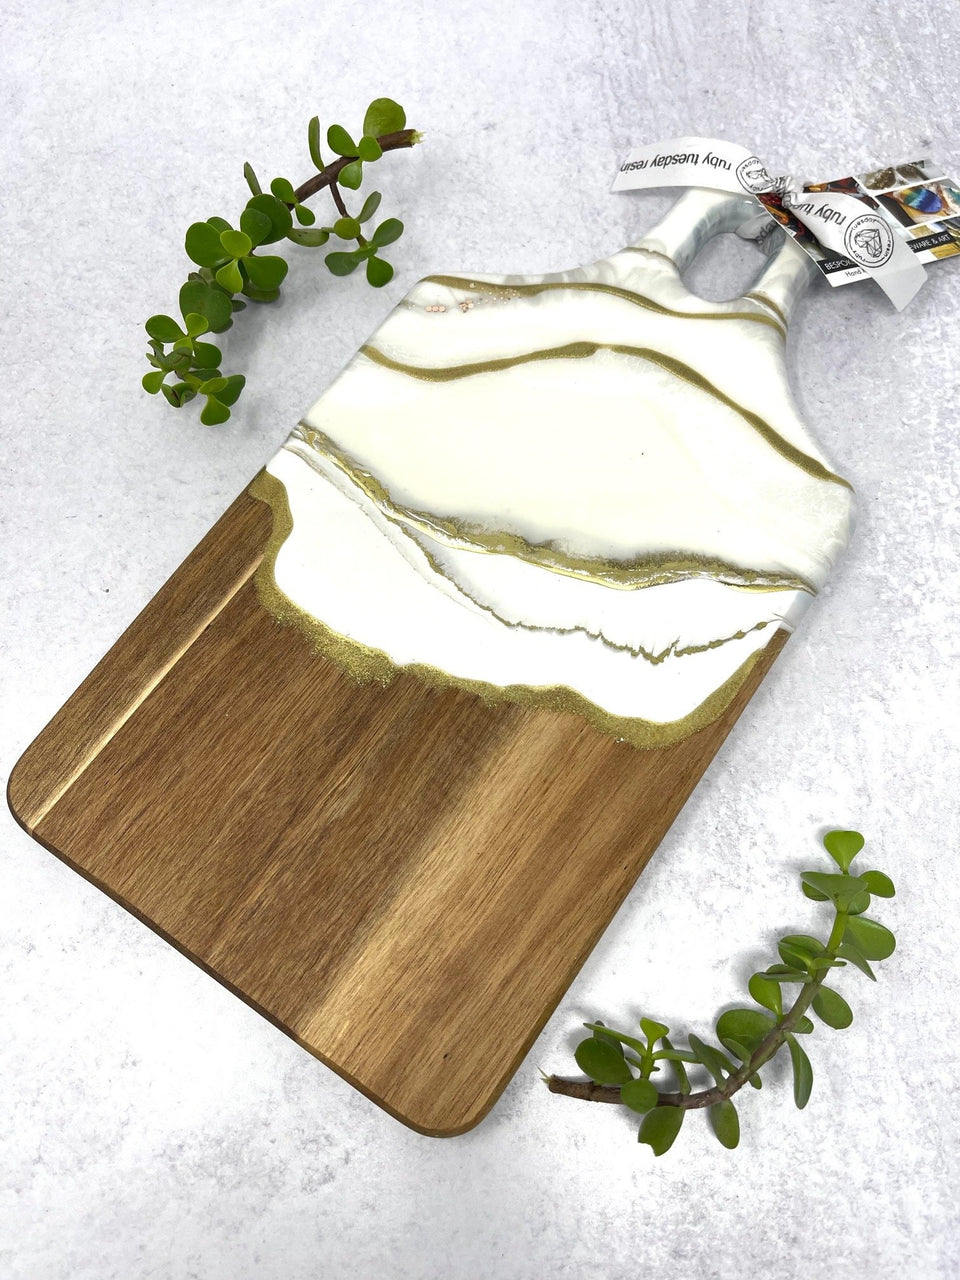 Ruby Tuesday Resin Mini Wooden Bridal Serving Boards